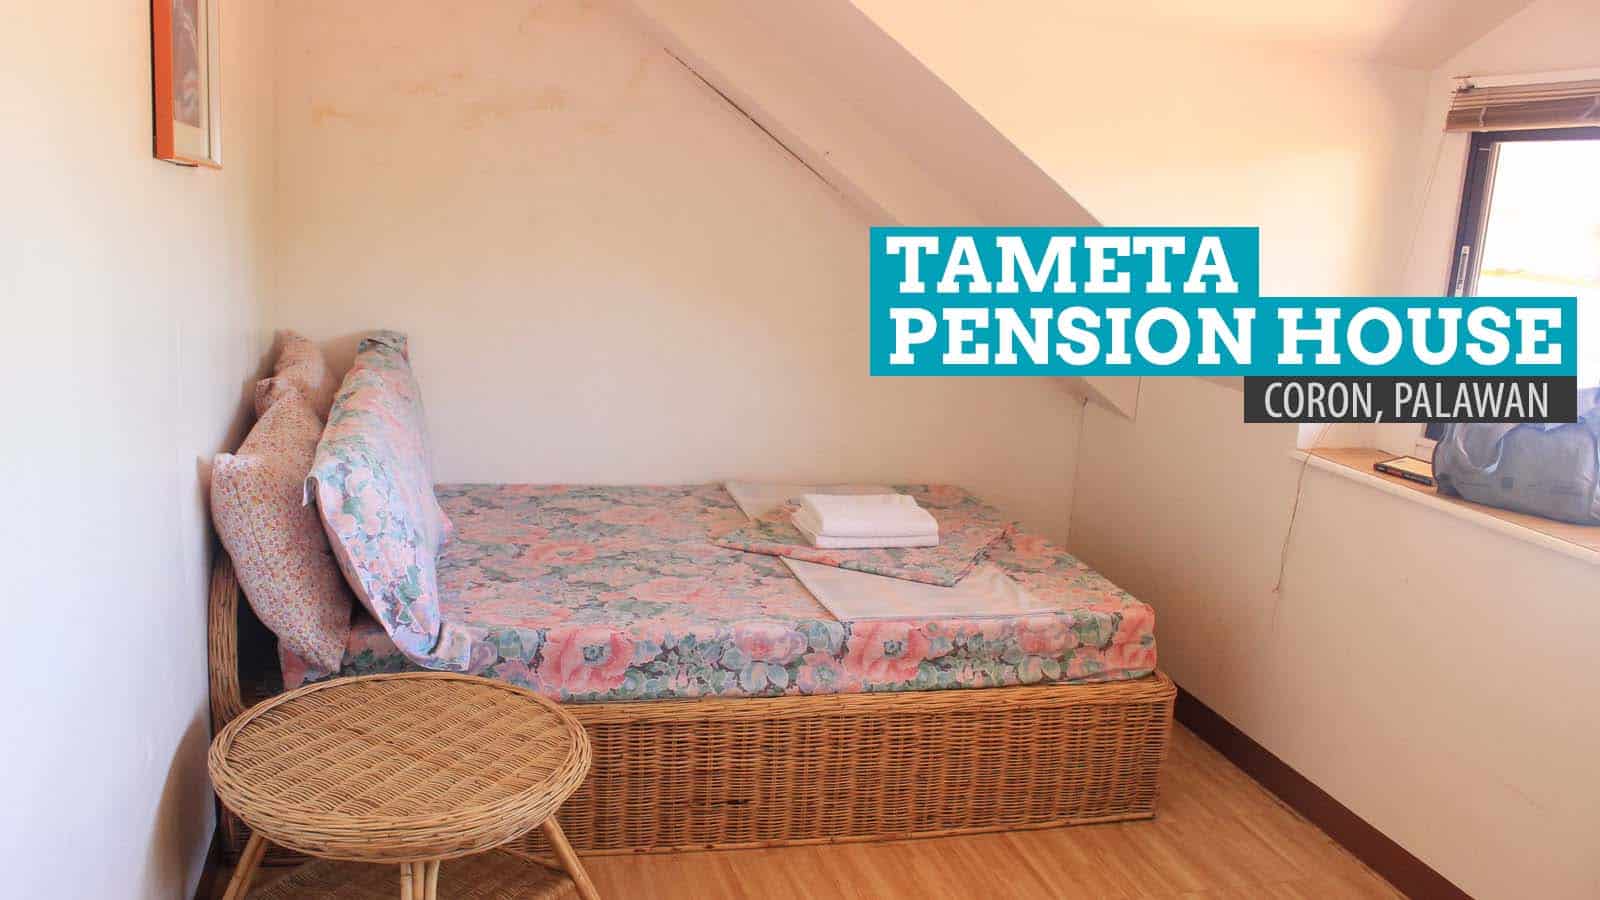 Tameta Pension House: Where to Stay in Coron, Palawan, Philippines